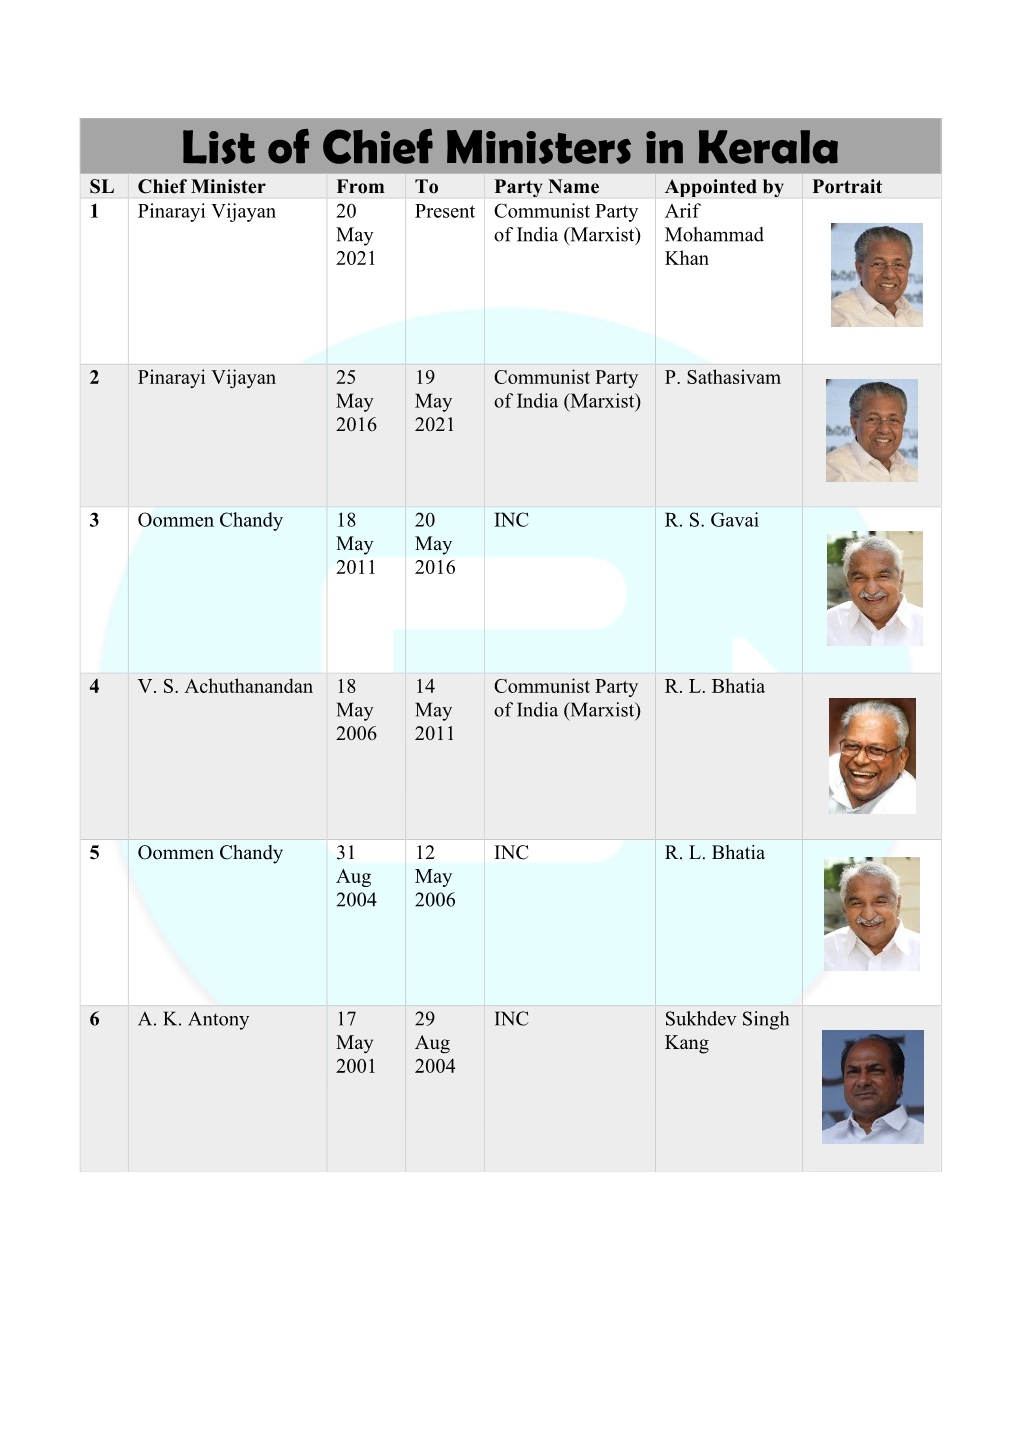 List of Chief Ministers in Kerala